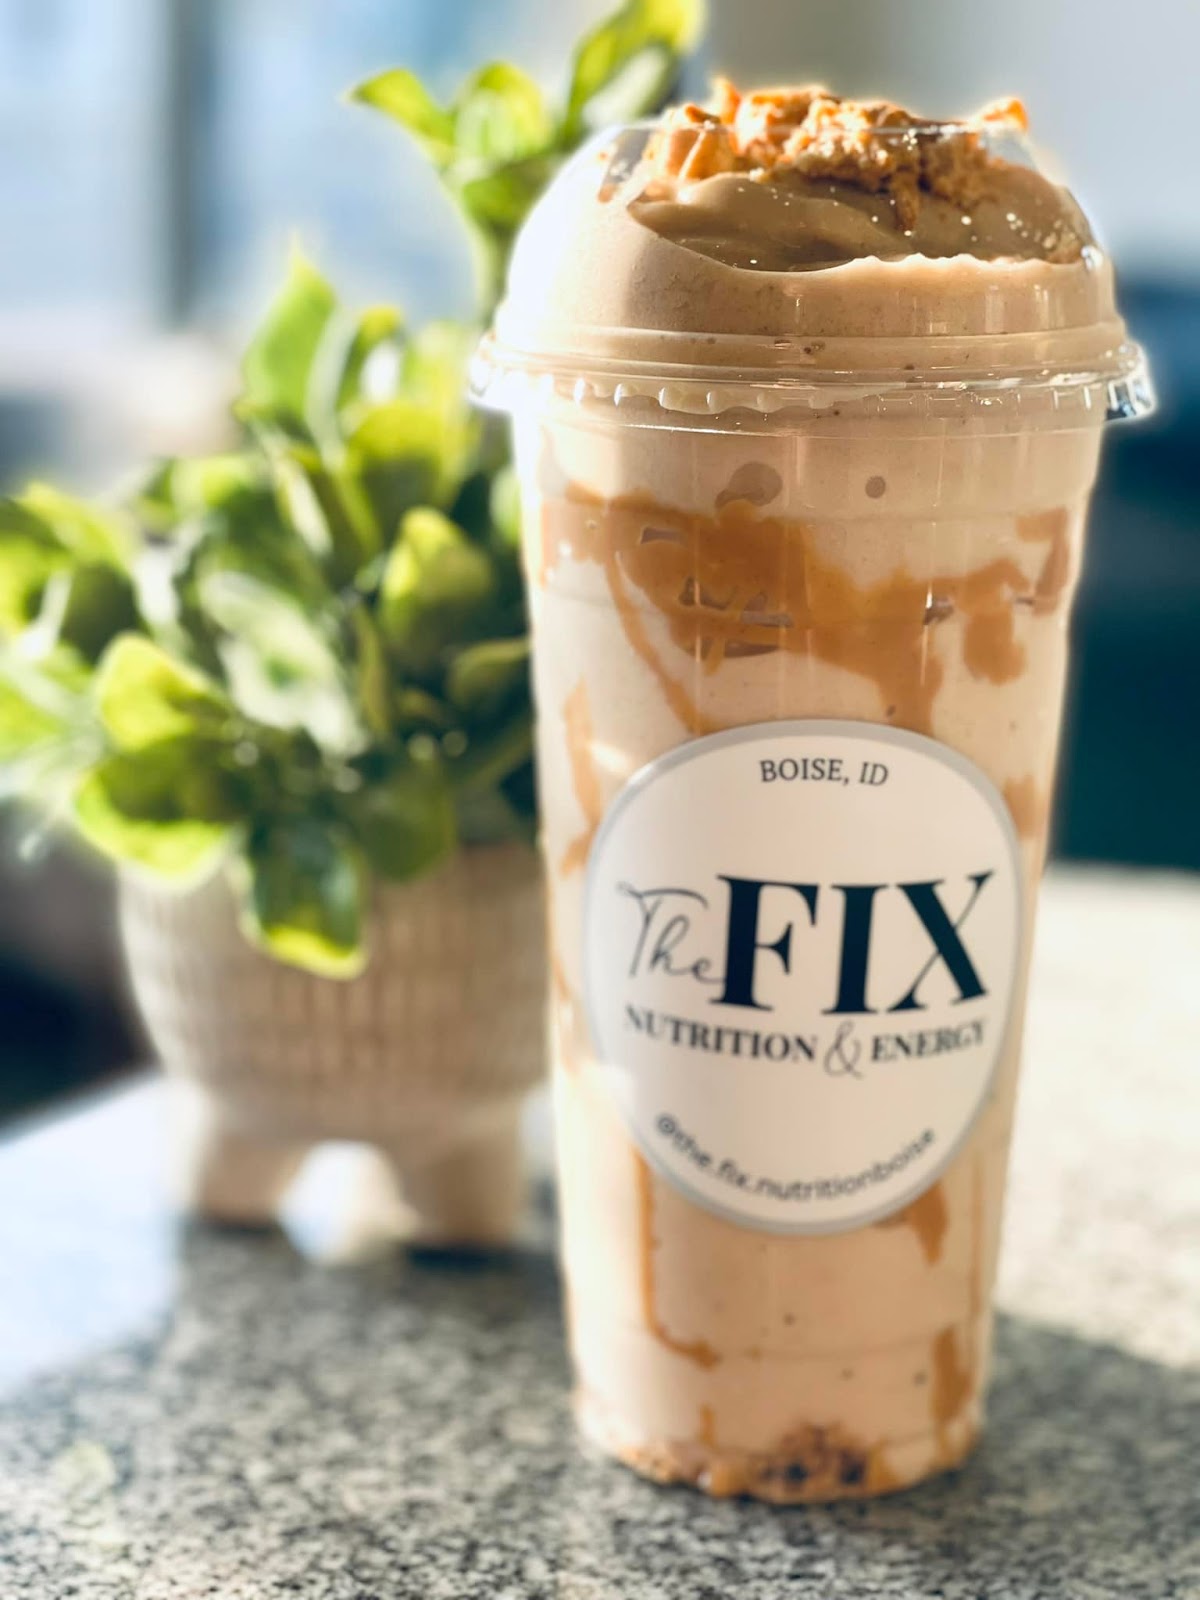 The FIX Nutrition &#038; Energy 1